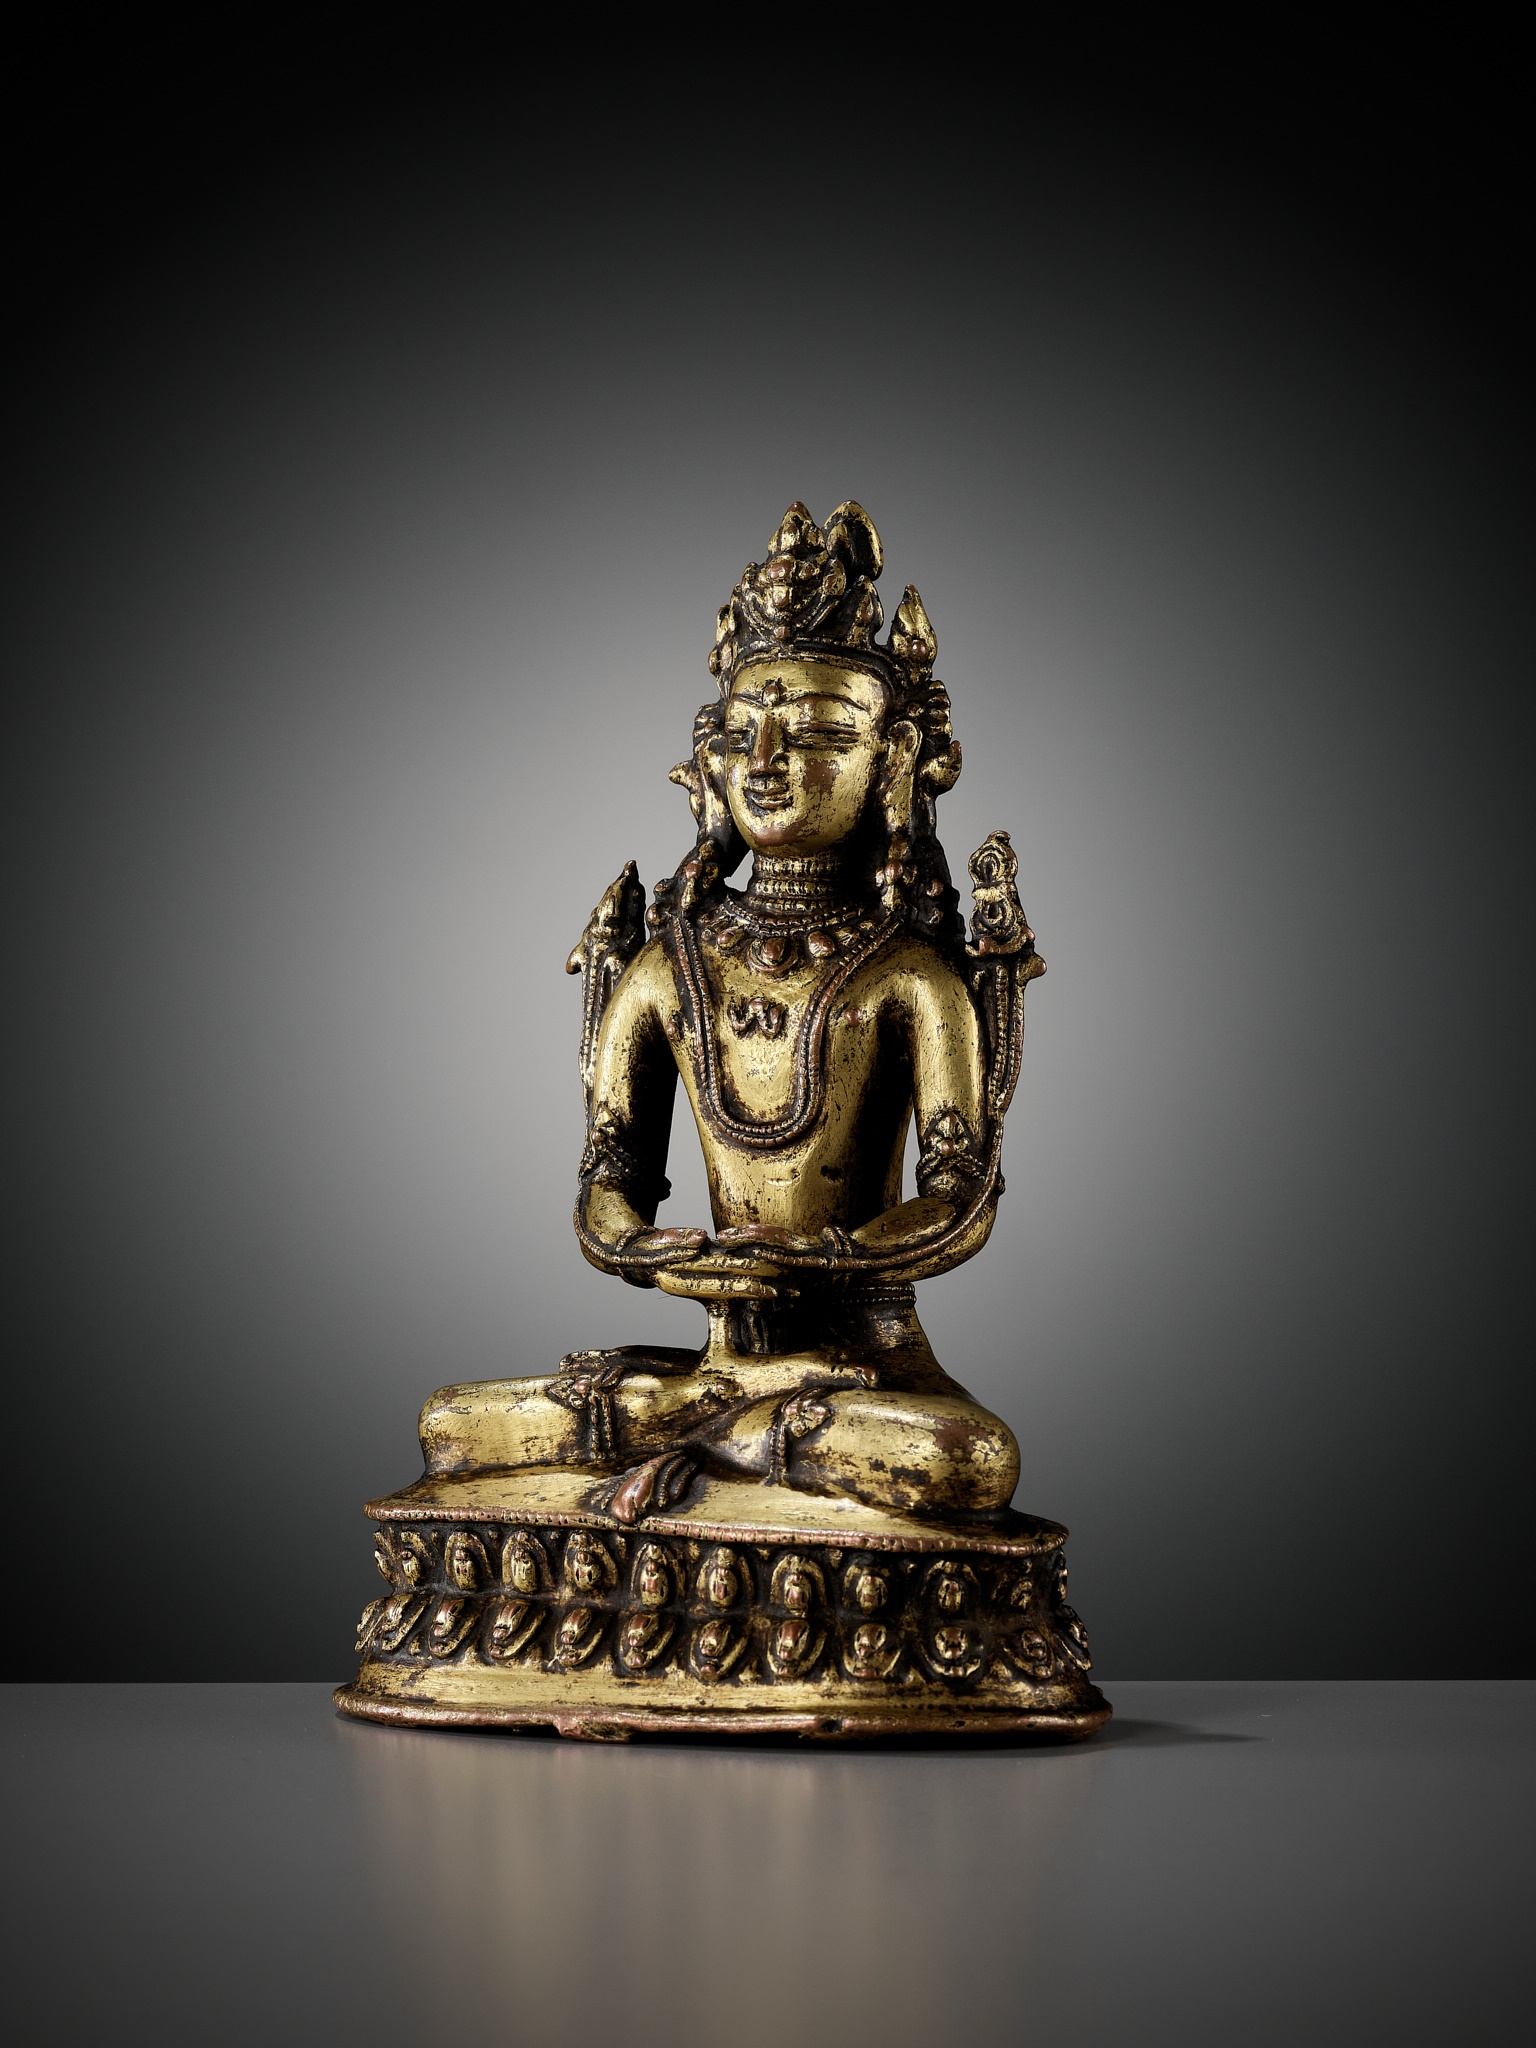 A GILT COPPER-ALLOY FIGURE OF KUNZANG AKOR, BON TRADITION, TIBET, 14TH-15TH CENTURY - Image 6 of 13